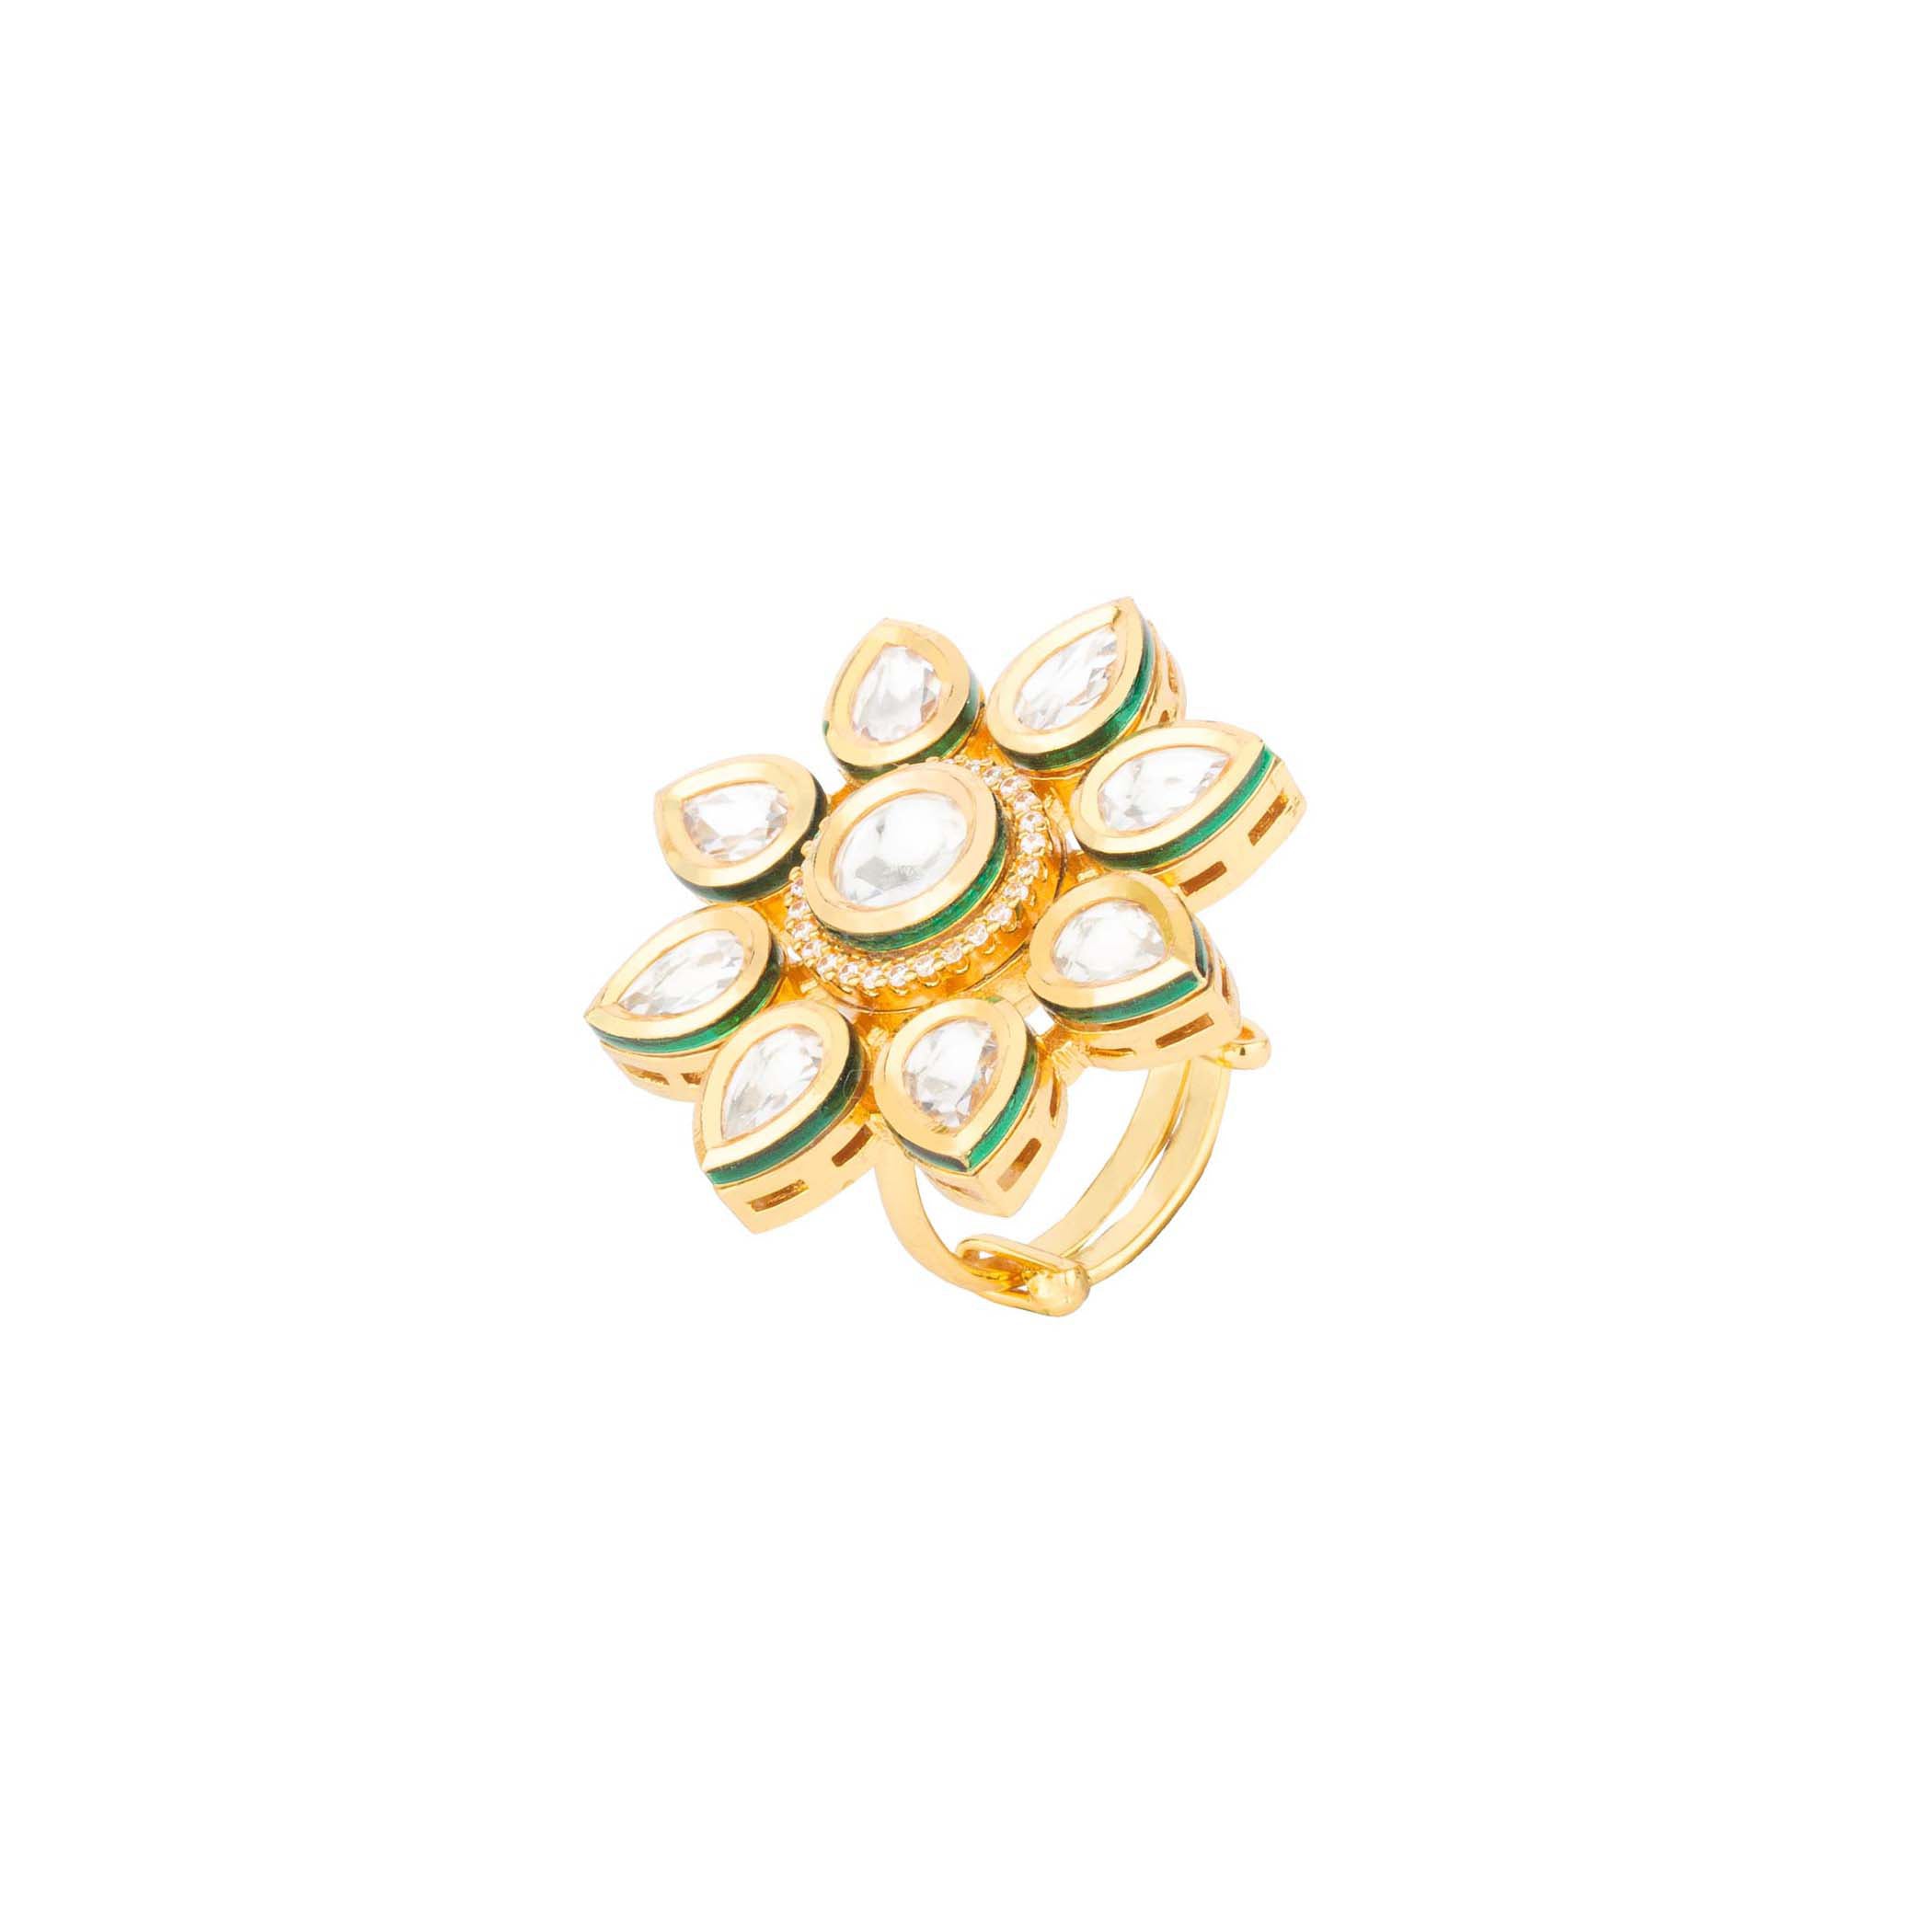 Put a ring on that outfit! This piece finished with imitation polki stones in a floral pattern is set in a mixed-metal alloy. 